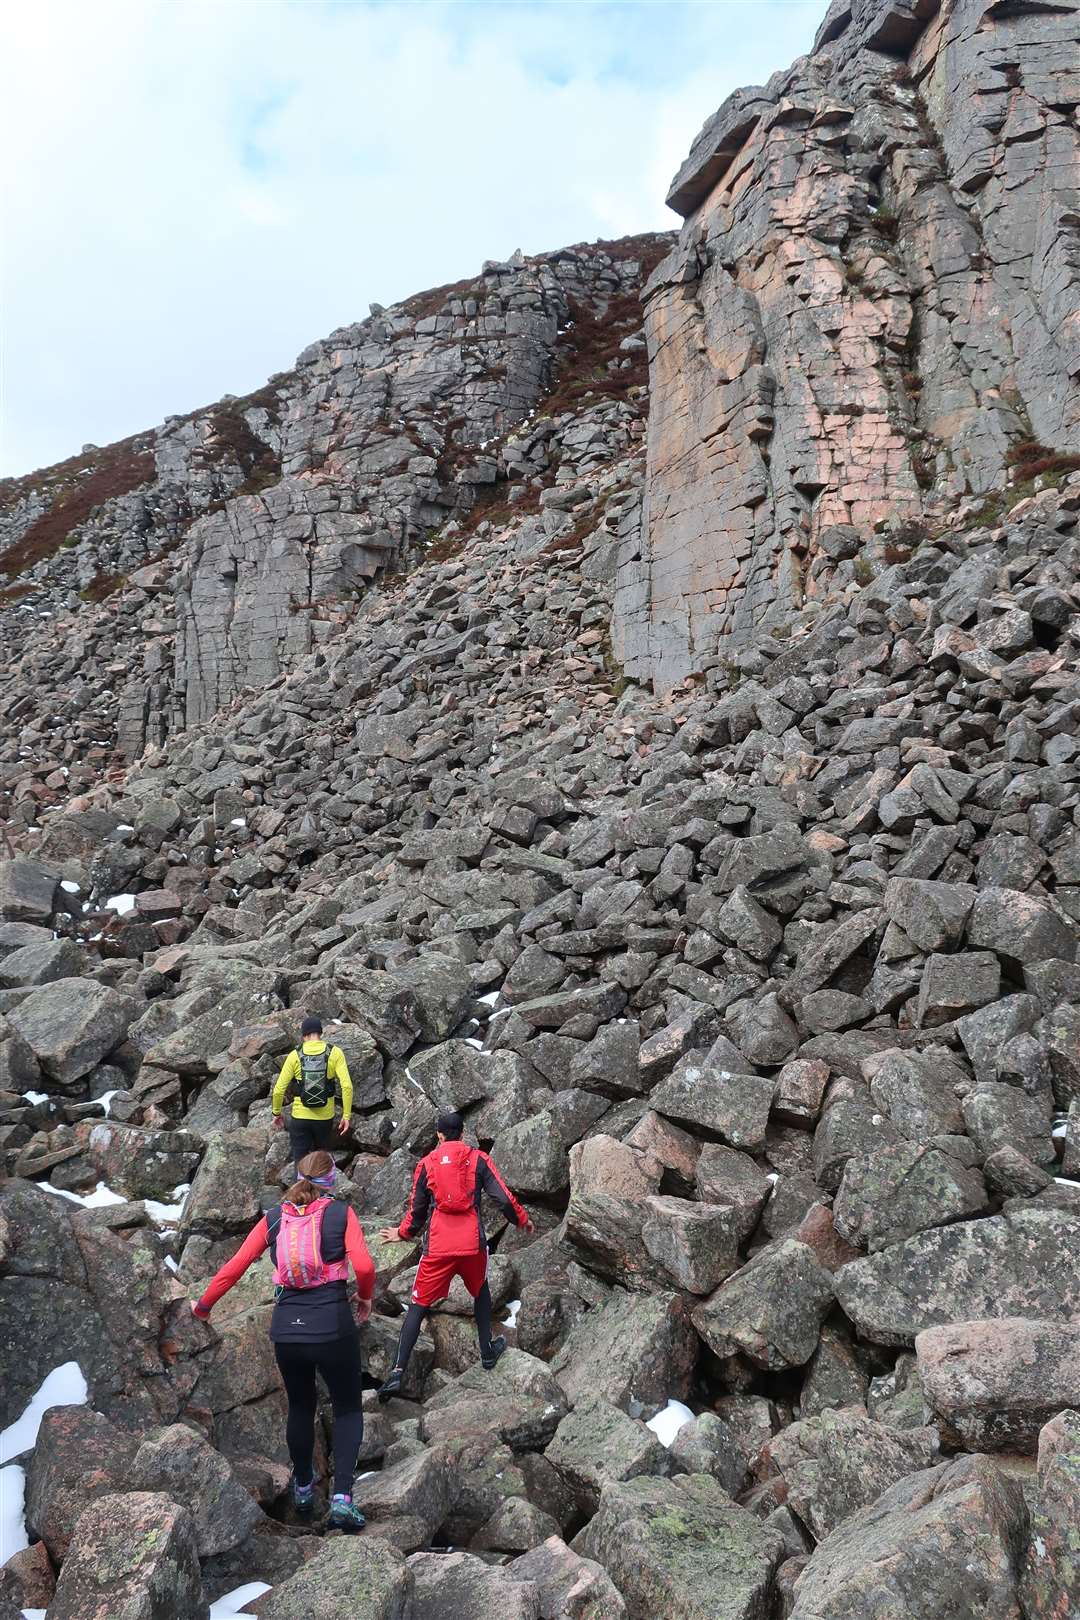 The scale of the Chalamain Gap is apparent as the group make their way through the boulder field.